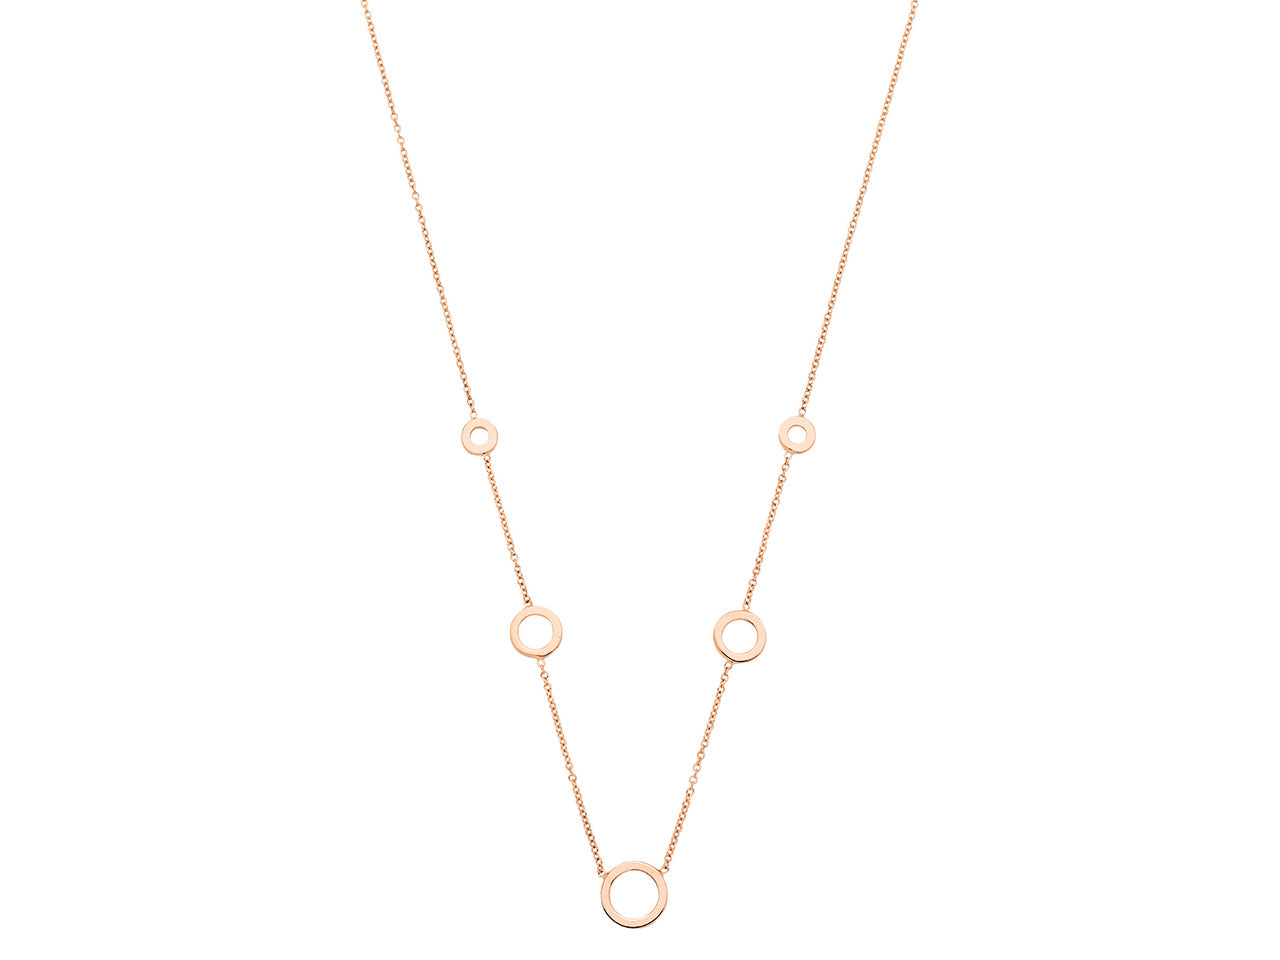 Collier Cercles chute Or rose 18 kt